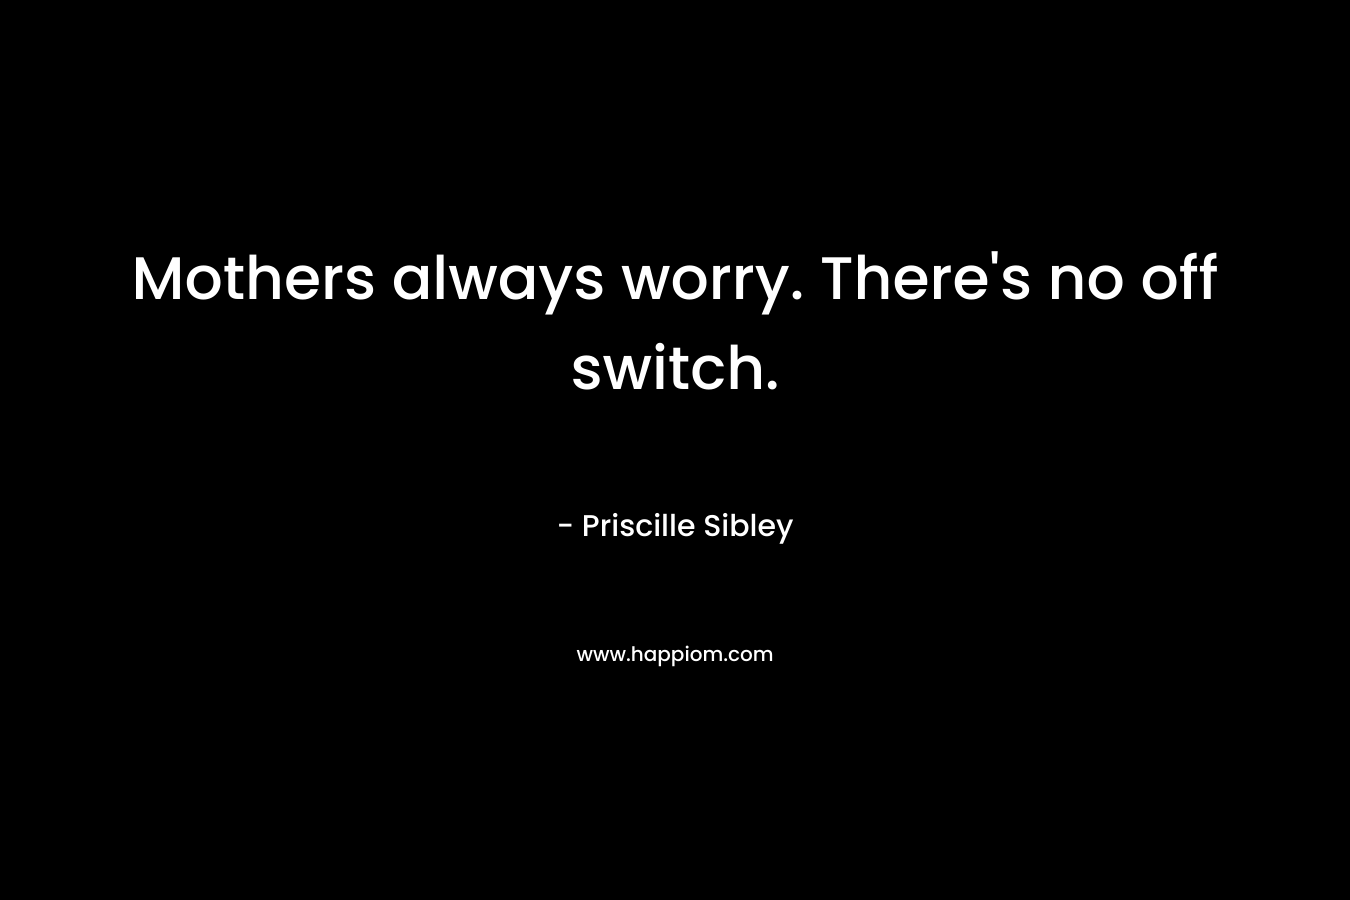 Mothers always worry. There's no off switch.